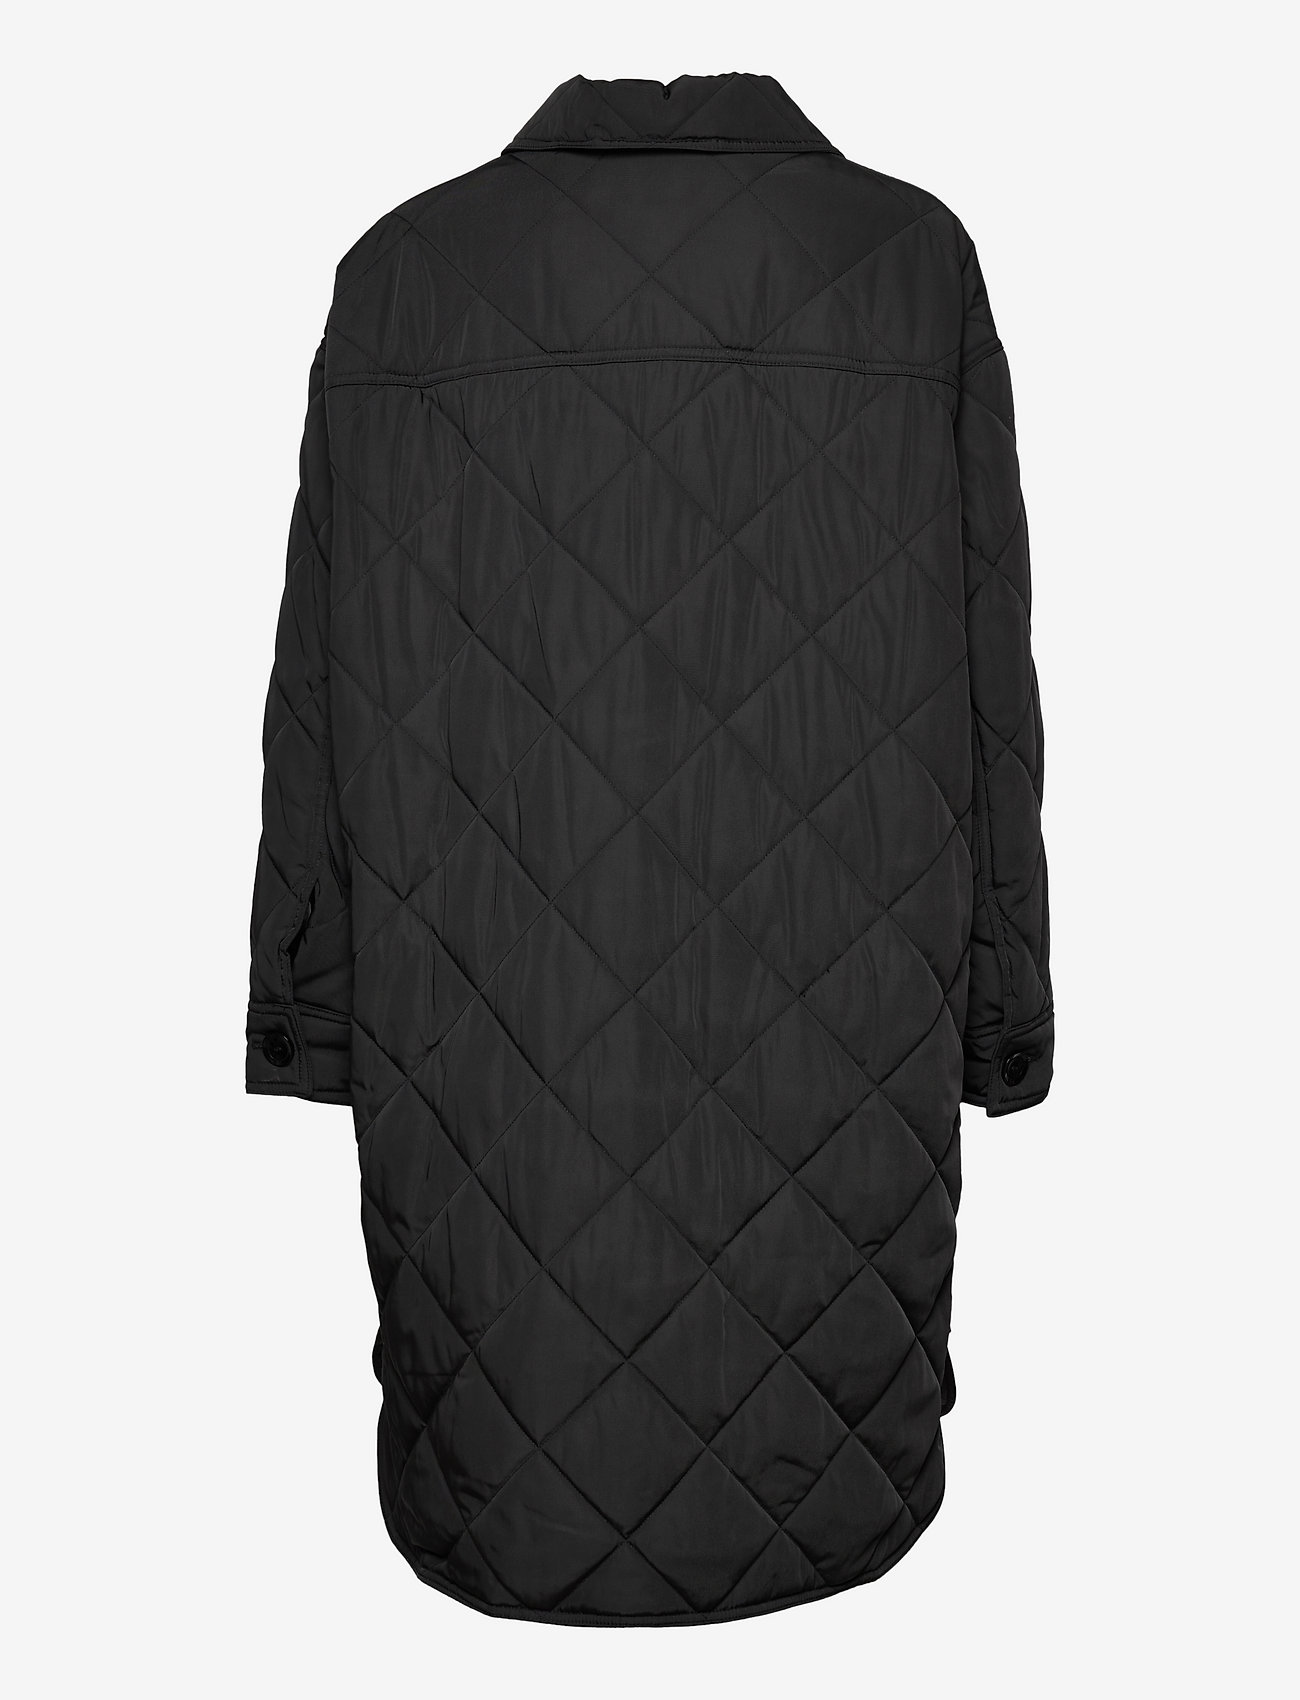 Stand Studio - Ronja Quilt Jacket - quilted jackets - black - 1